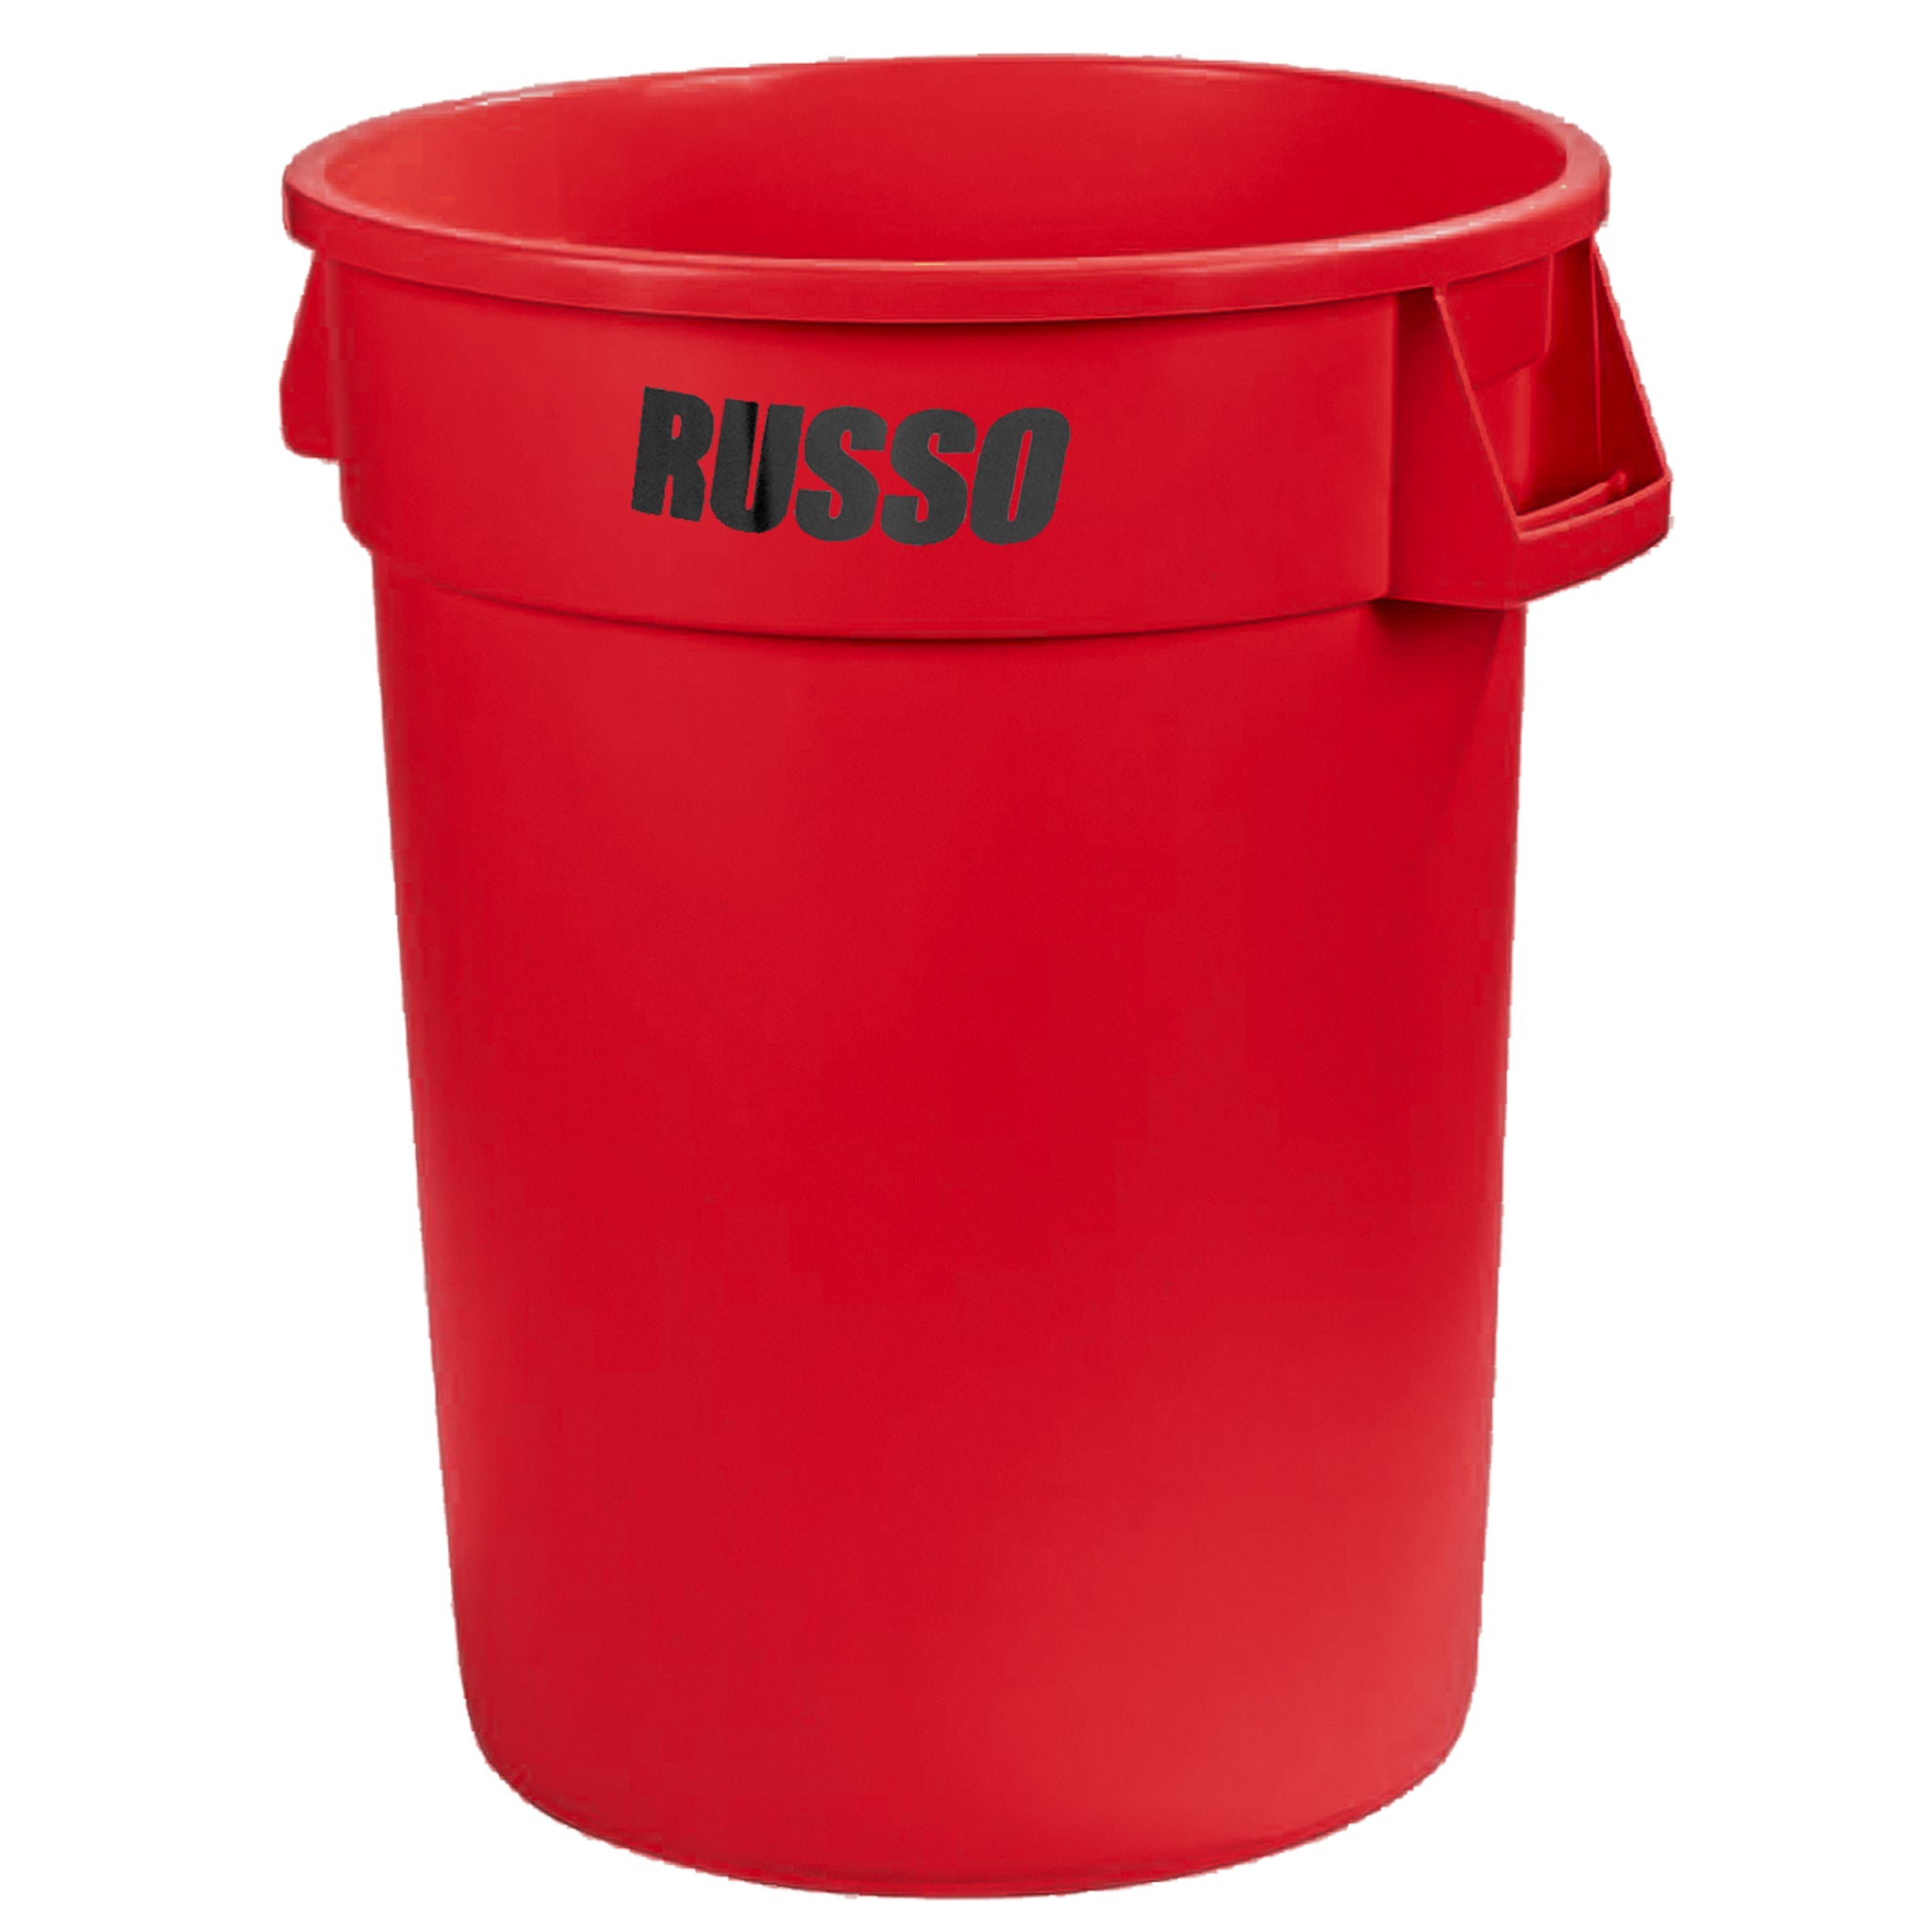 RUSSO Glow Can Container 32 Gallon - Red